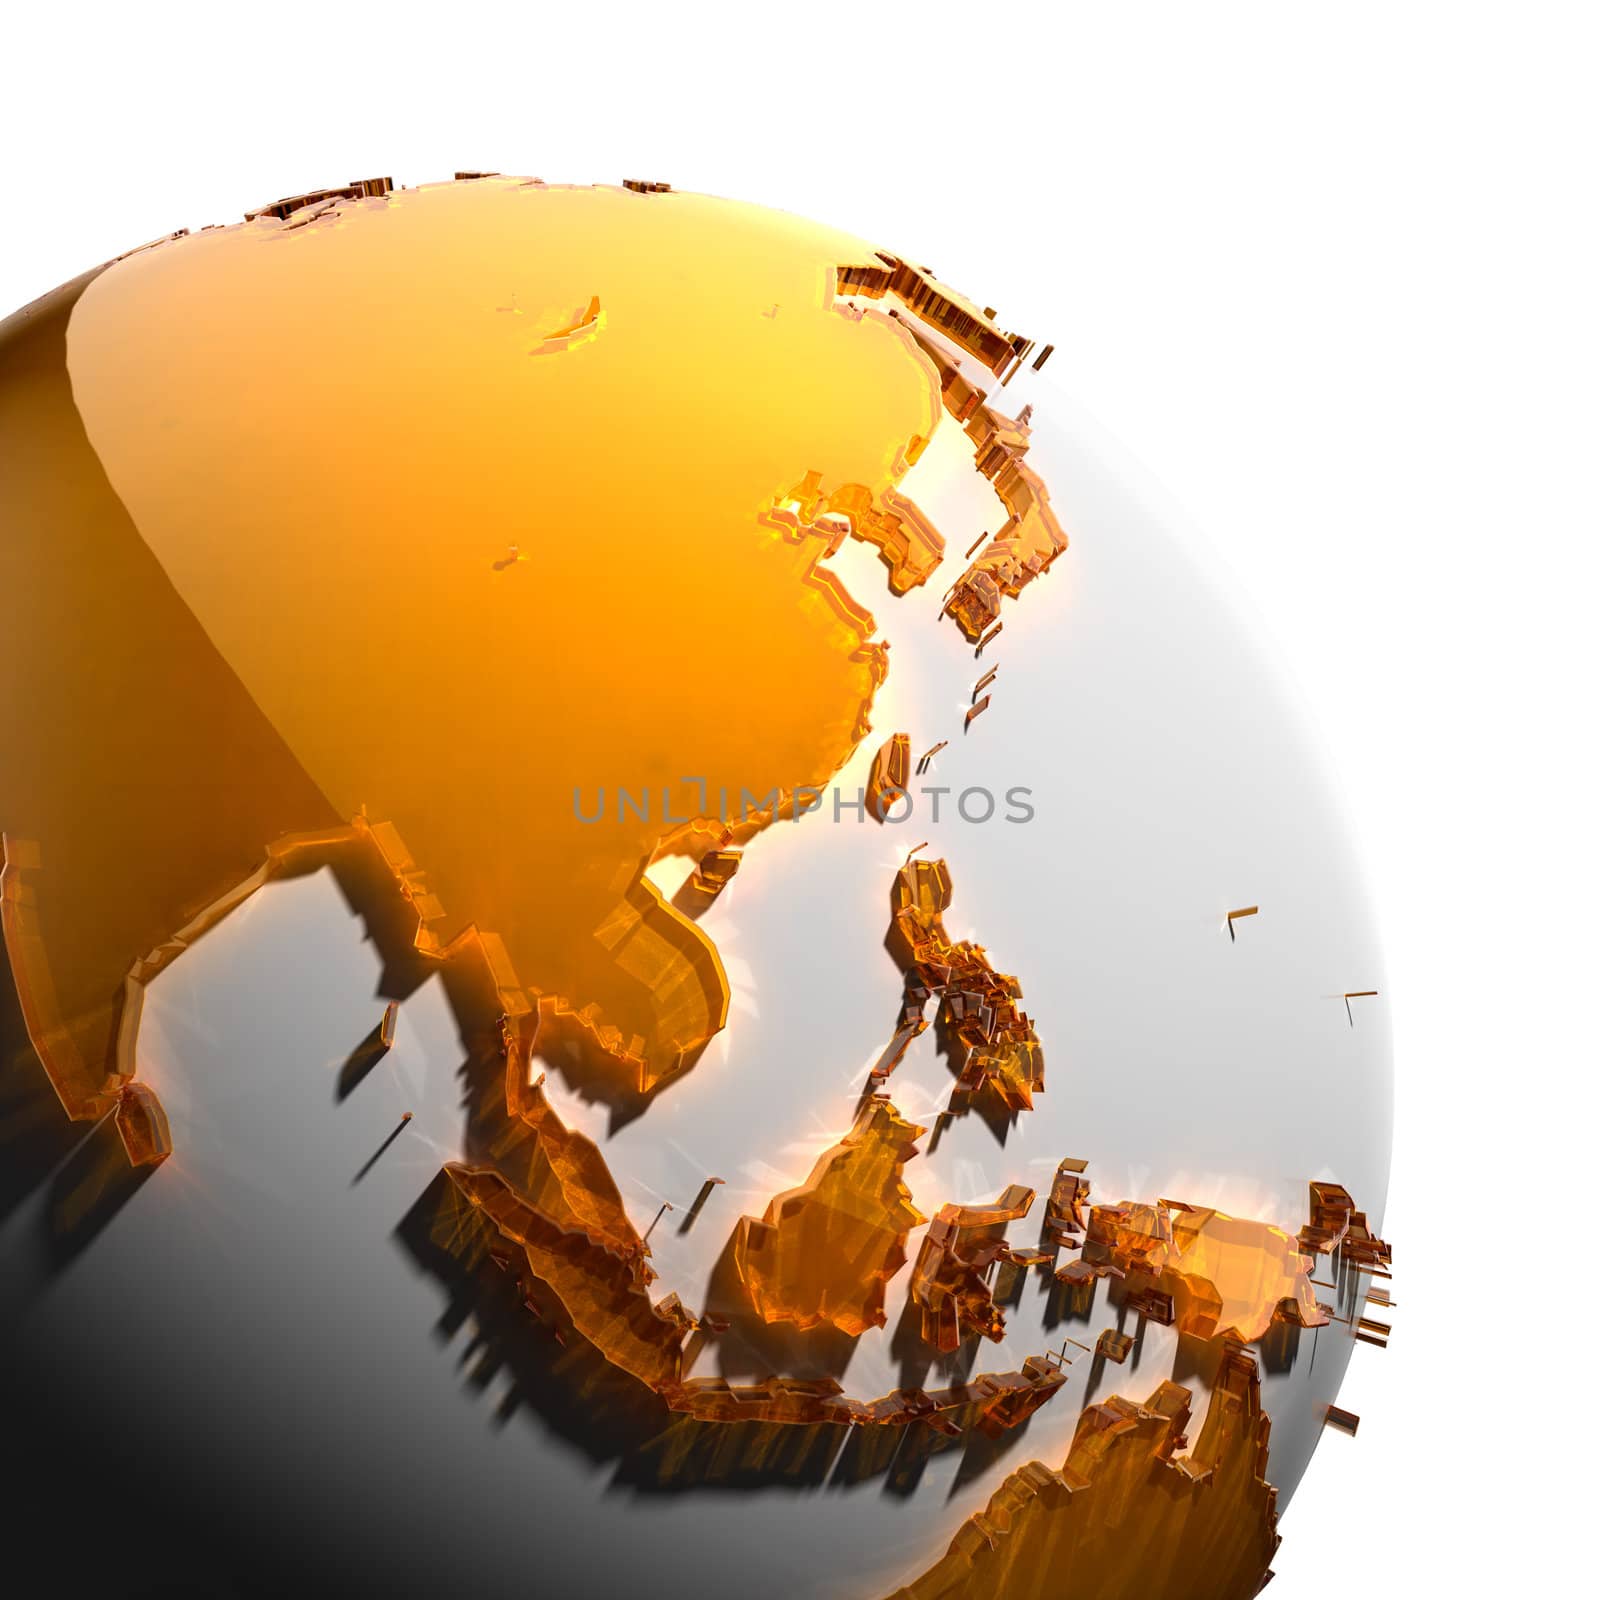 A fragment of the globe with the continents of thick faceted amber glass, which falls on hard light, creating a caustic glare on faces. Isolated on white background